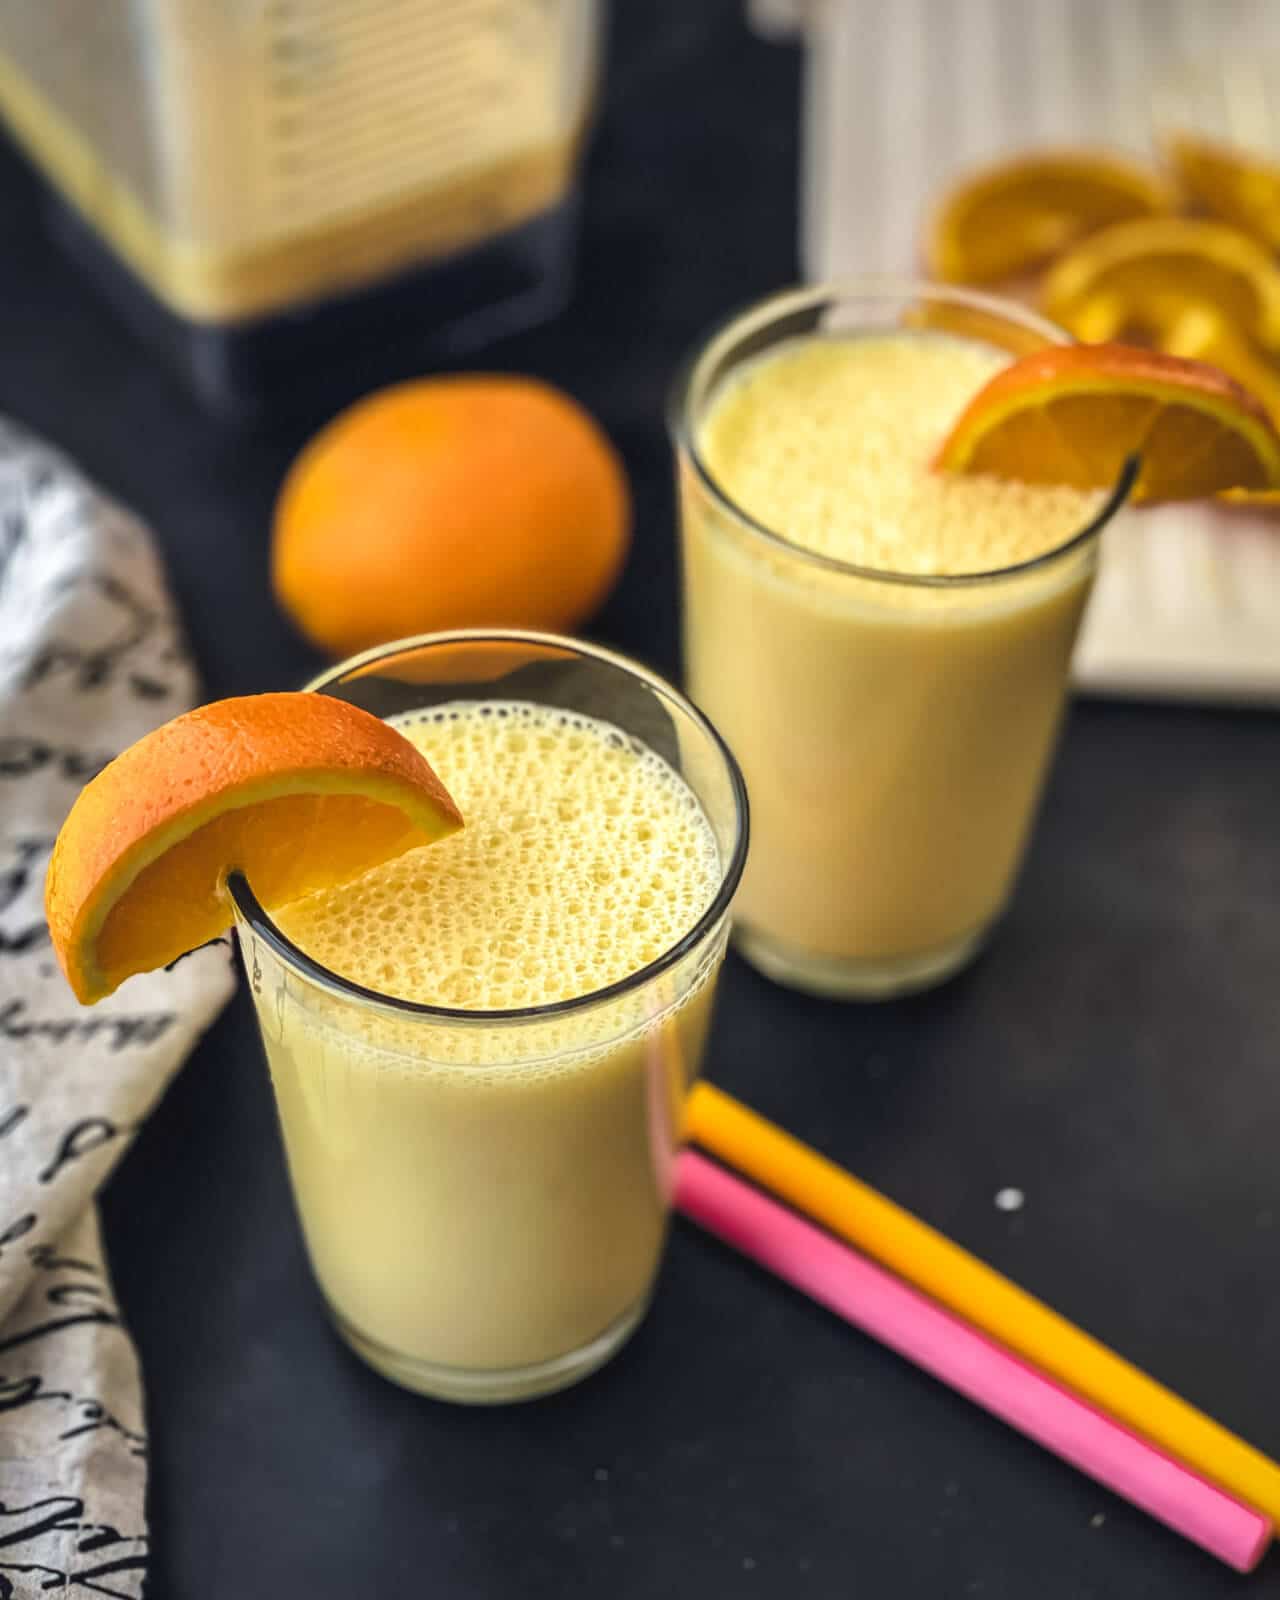 Two glasses of orange smoothie with an orange slice on the rim, two straws in between, and an orange in the back.